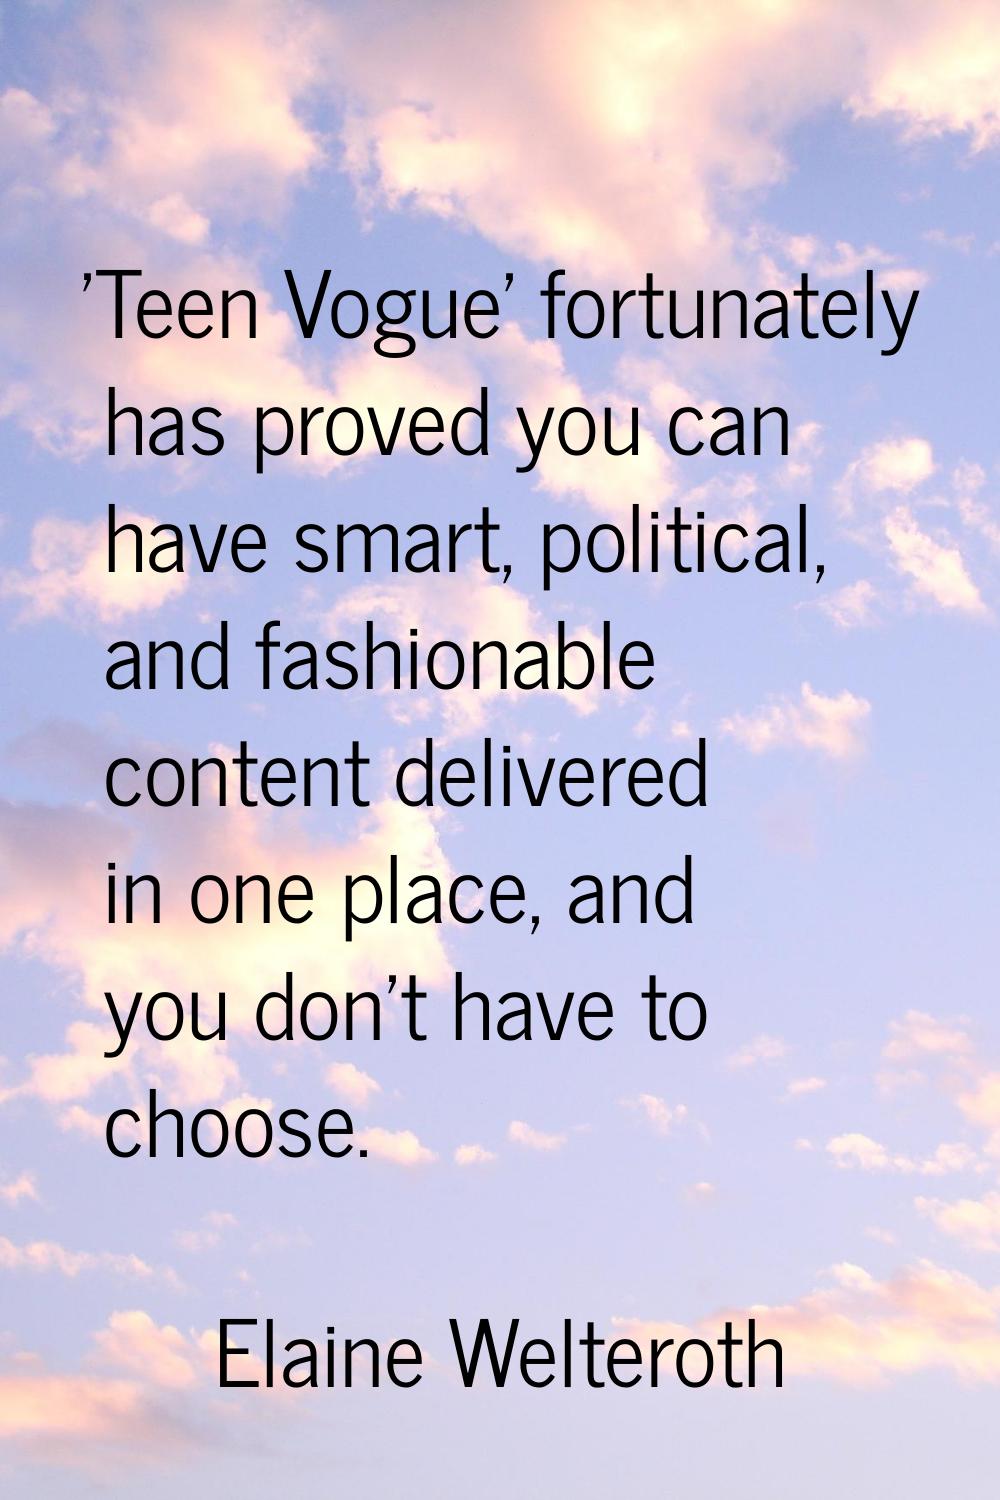 'Teen Vogue' fortunately has proved you can have smart, political, and fashionable content delivere